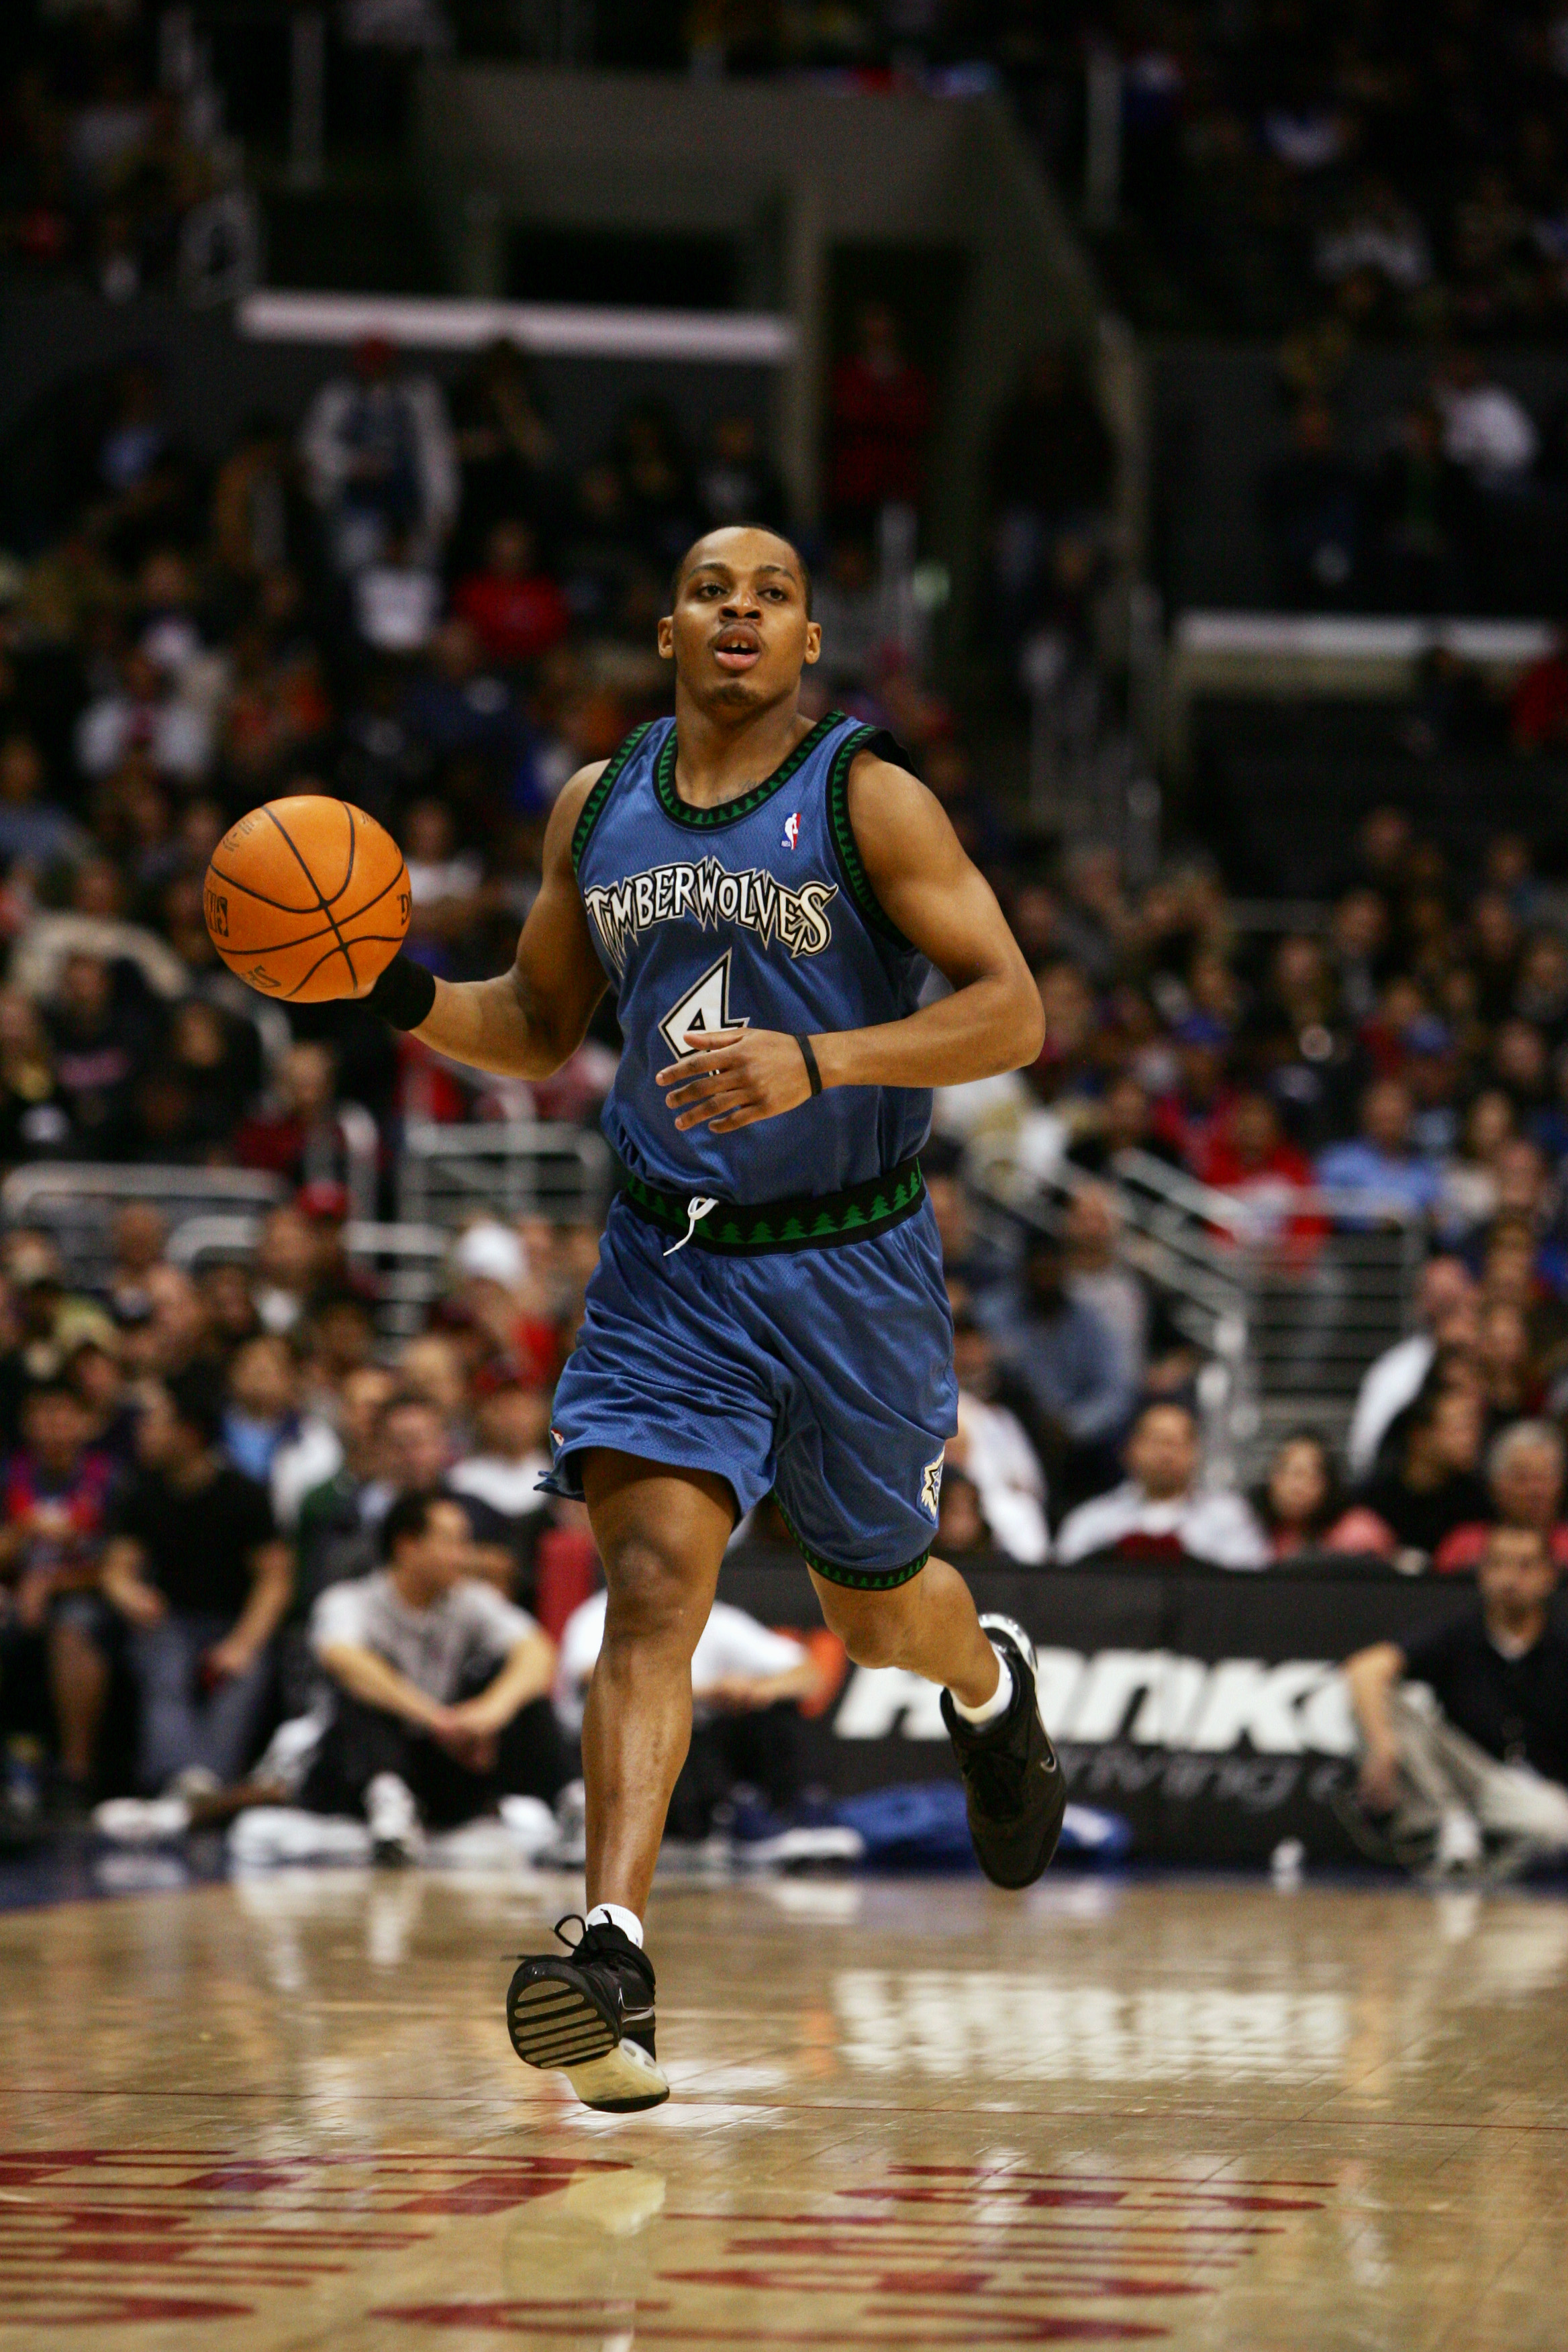 LOS ANGELES, CA - JANUARY 27:  Randy Foye #4 of the Minnesota Timberwolves moves the ball against the Los Angeles Clippers at Staples Center on January 27, 2007 in Los Angeles, California.  The Timberwolves won 101-87.  NOTE TO USER: User expressly acknow